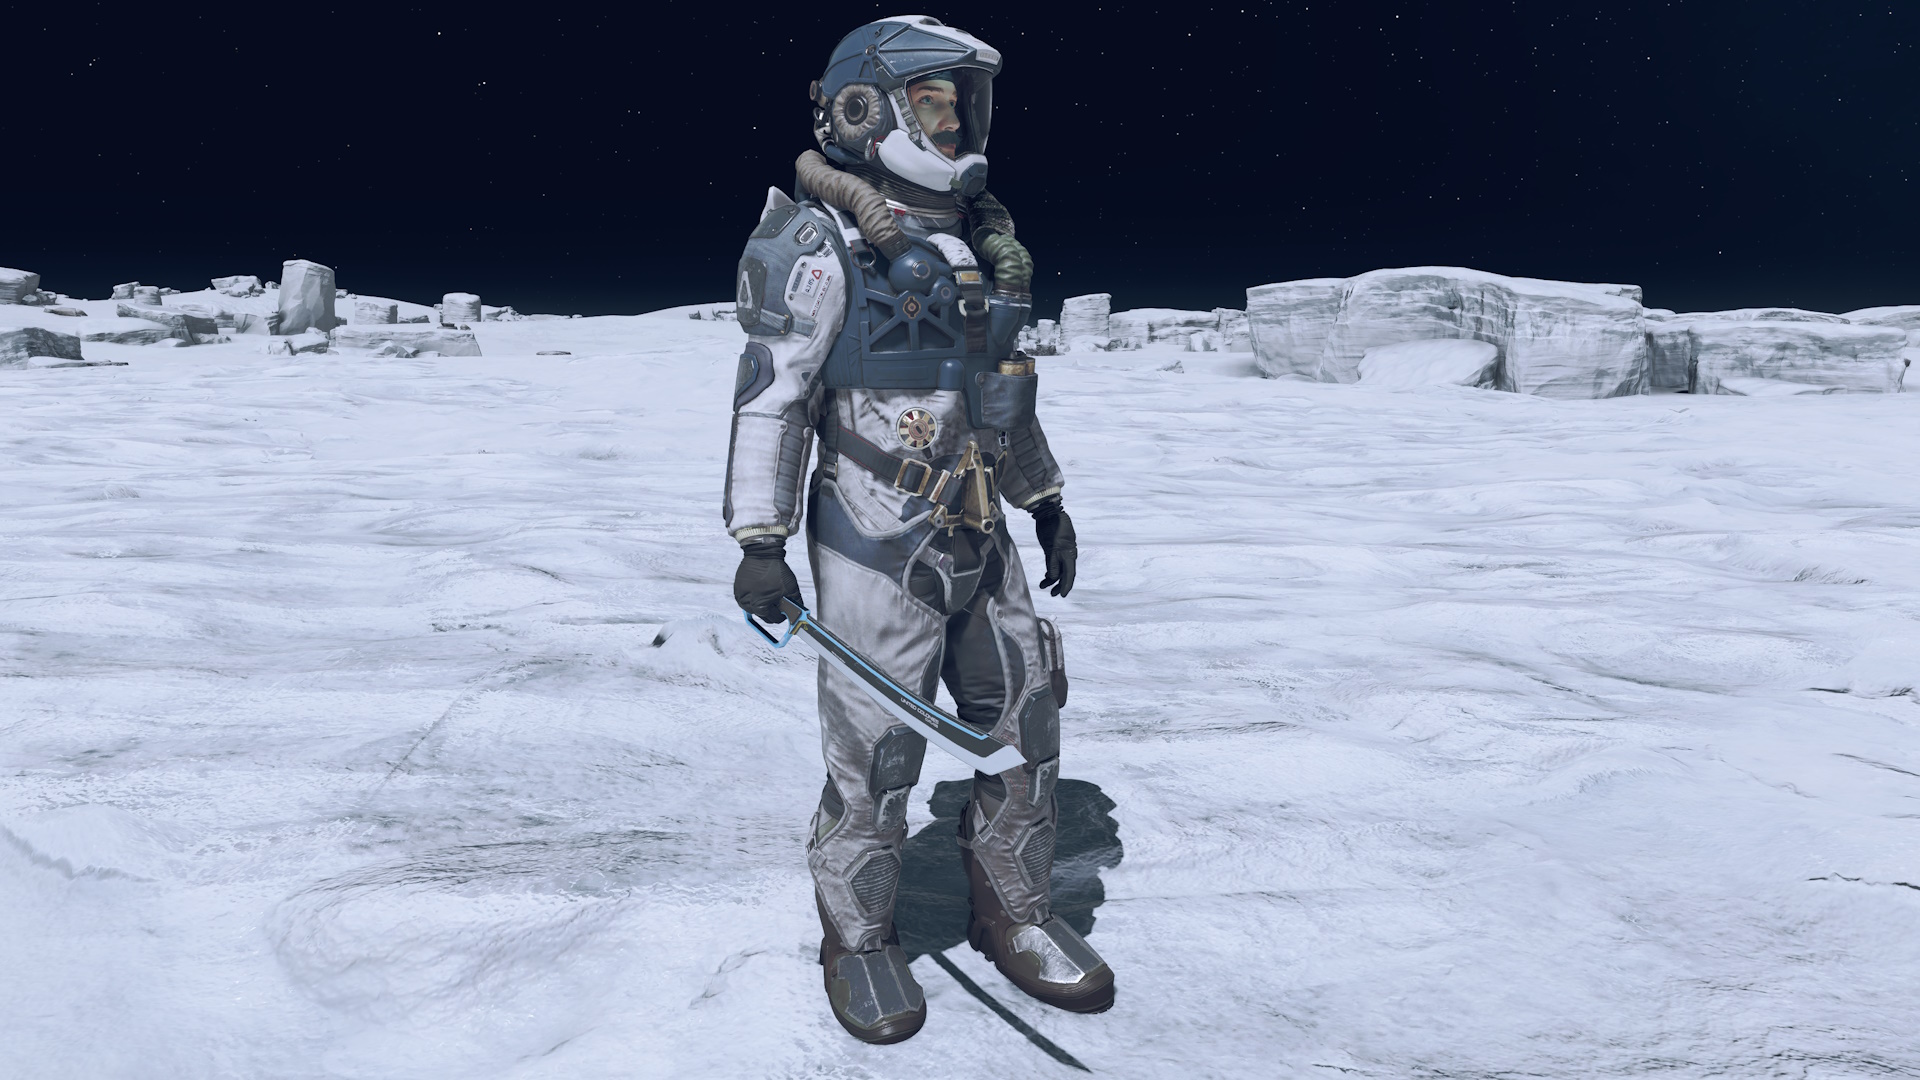 Screenshot of Starfield (2023) showing the player character wearing a spacesuit.